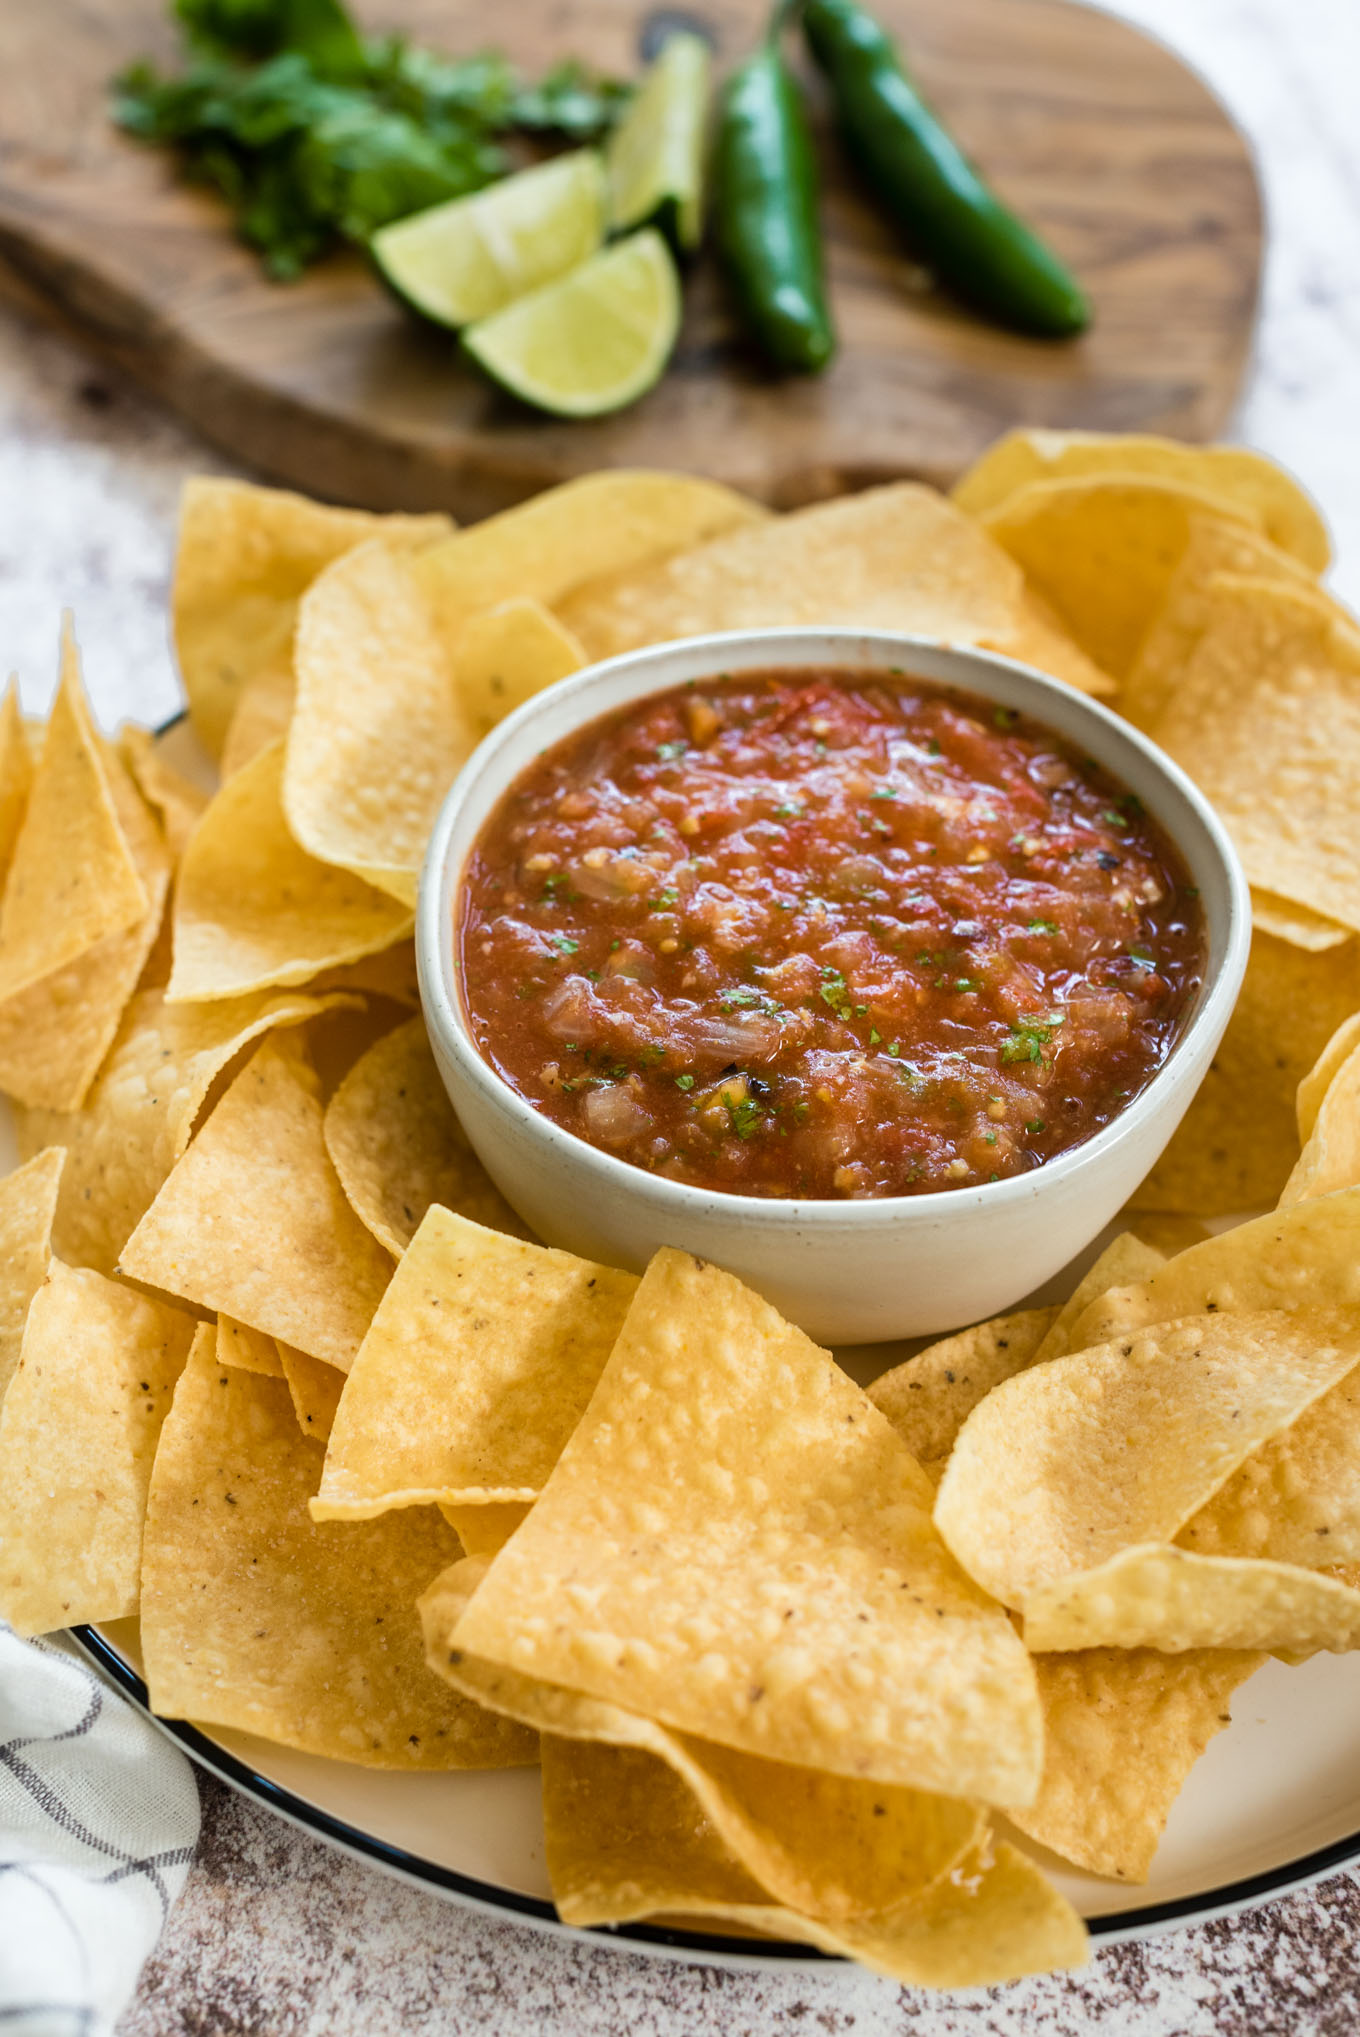 Tortilla chips with salsa 